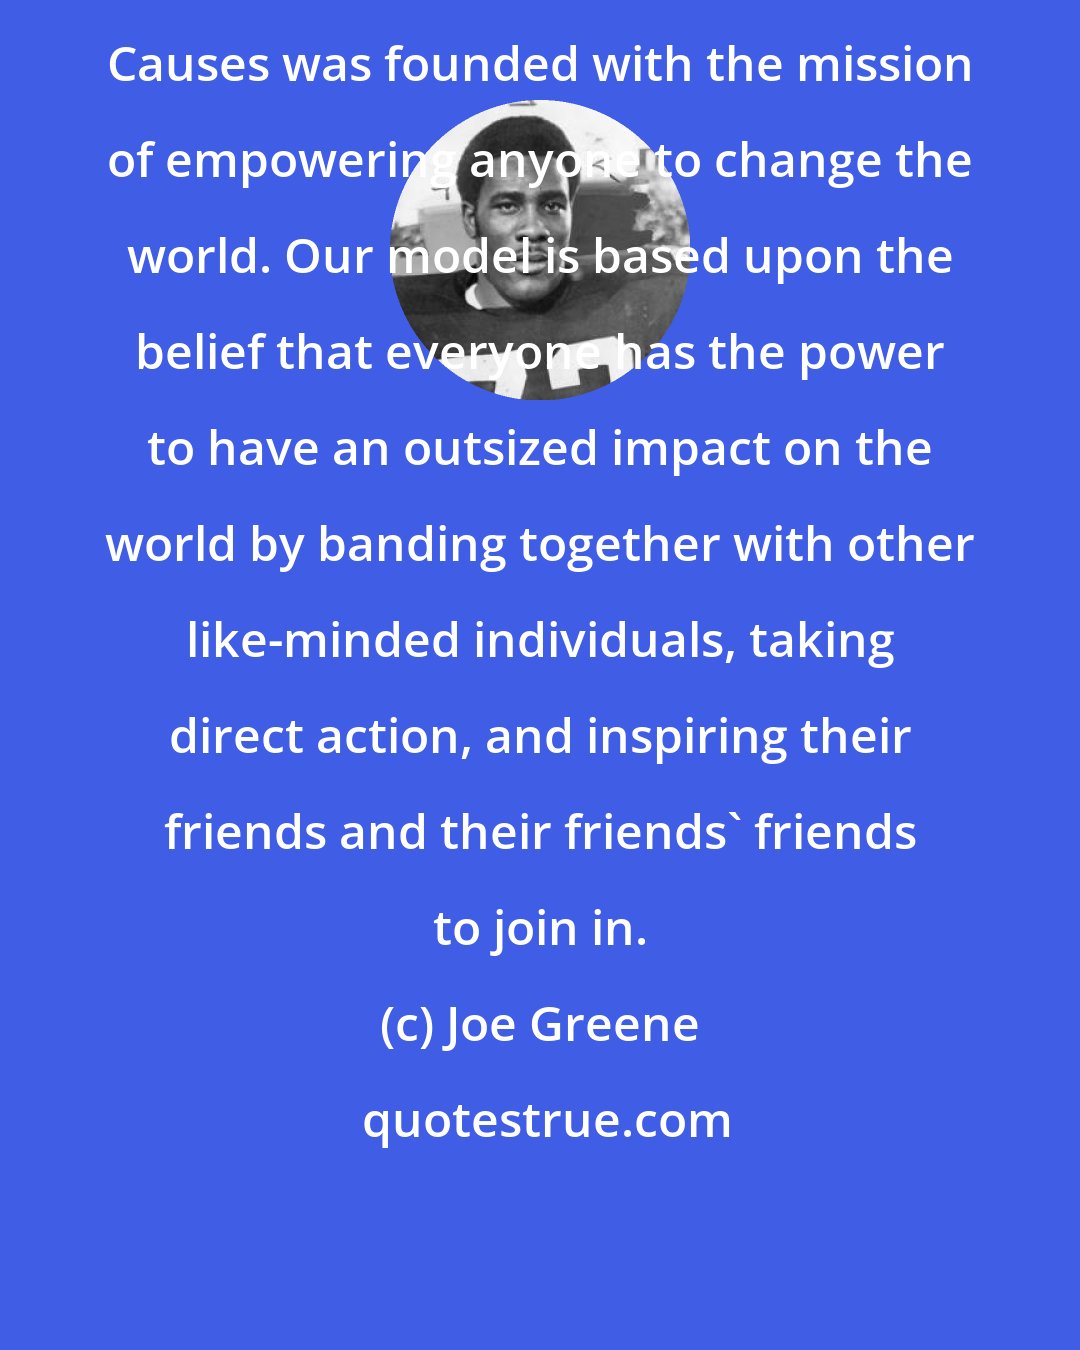 Joe Greene: Causes was founded with the mission of empowering anyone to change the world. Our model is based upon the belief that everyone has the power to have an outsized impact on the world by banding together with other like-minded individuals, taking direct action, and inspiring their friends and their friends' friends to join in.